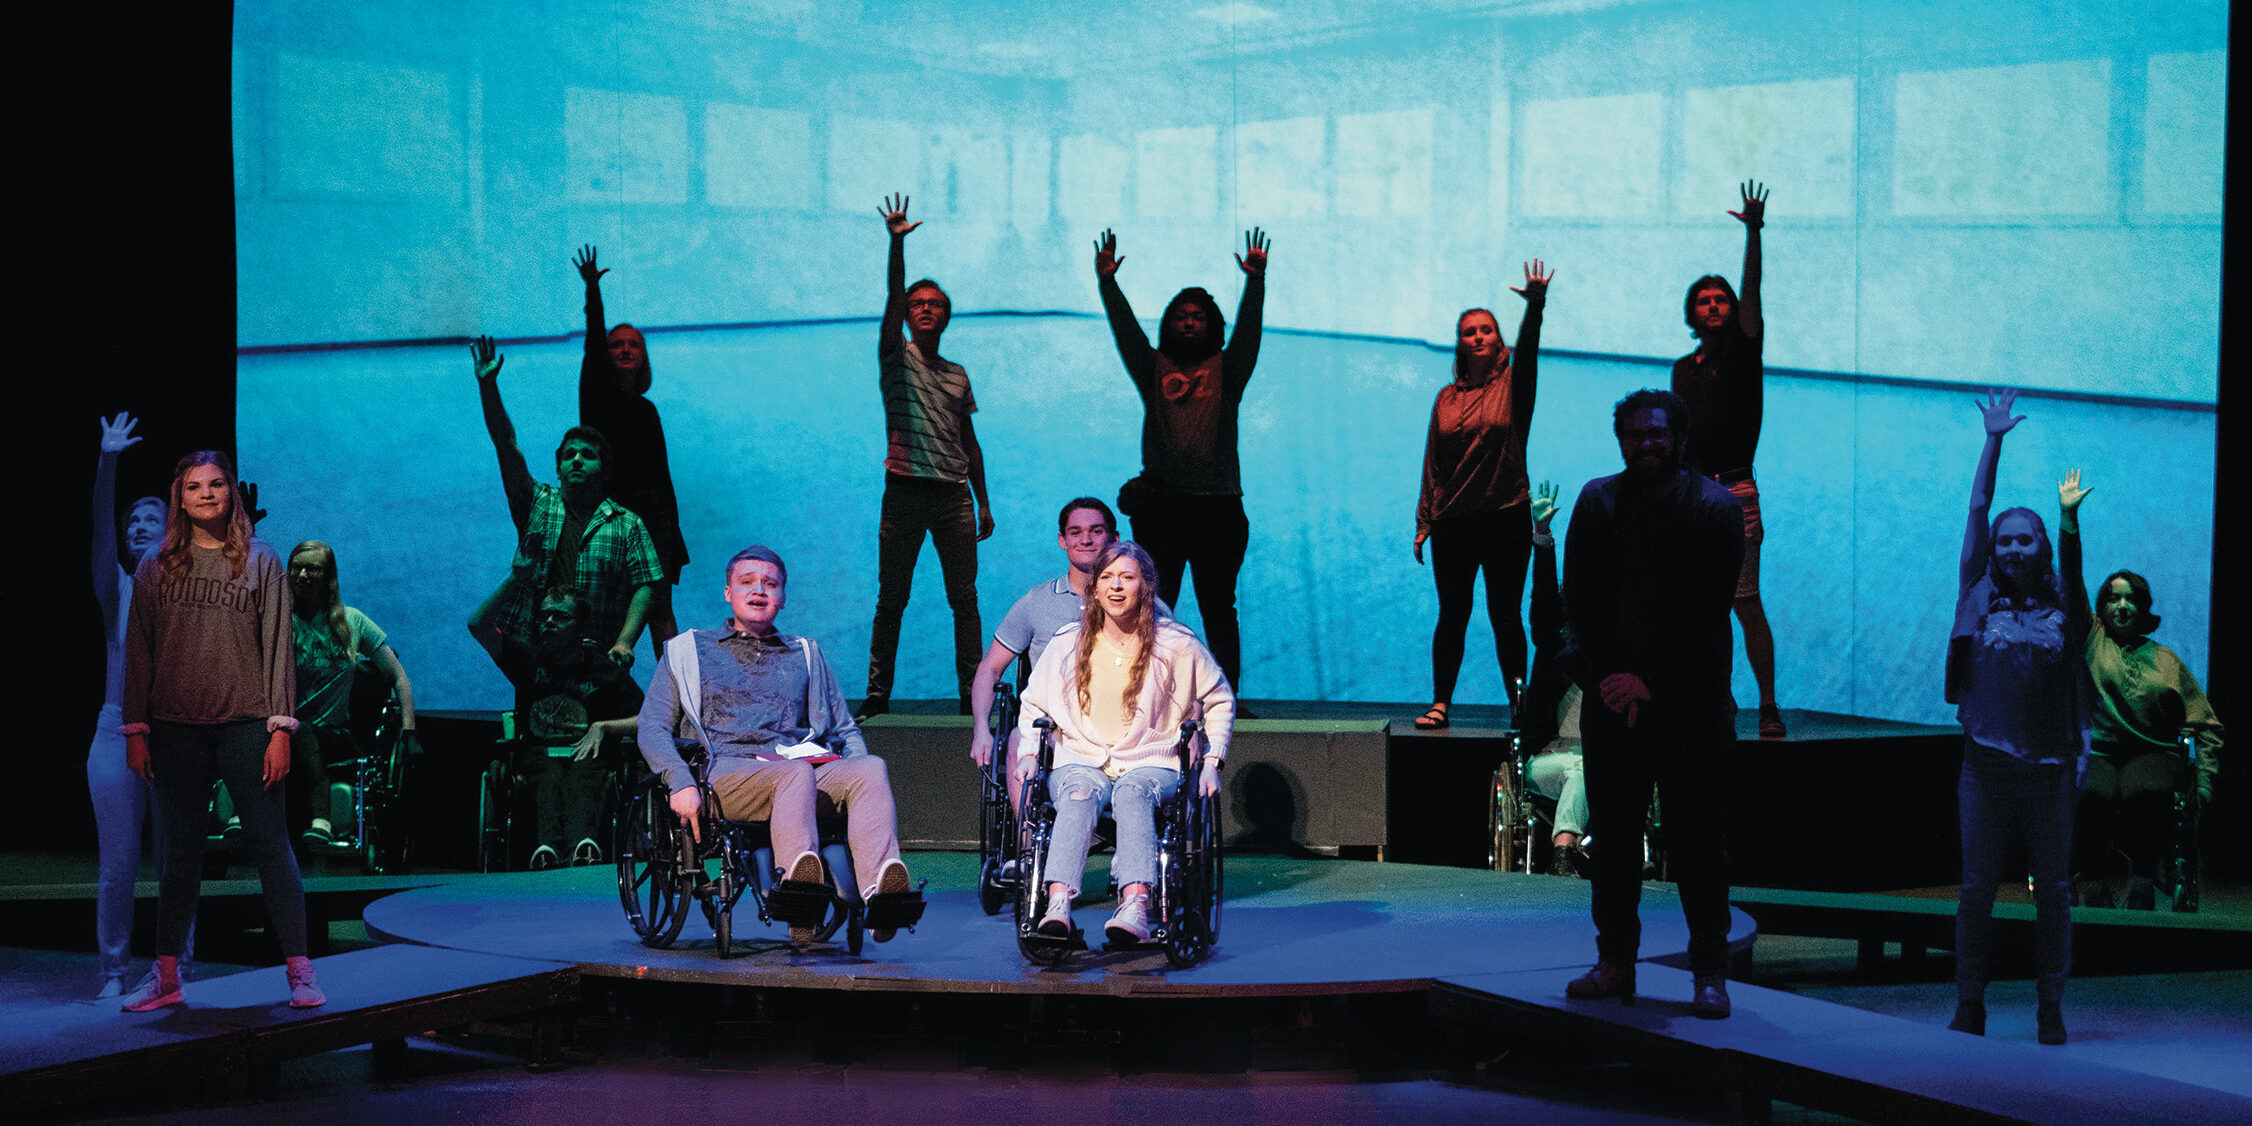 A scene in “Wheels: An Original Musical,” where 17 people can be seen on stage facing the audience, some sitting in wheelchairs and some standing with a hand raised in the air against a blue backdrop.